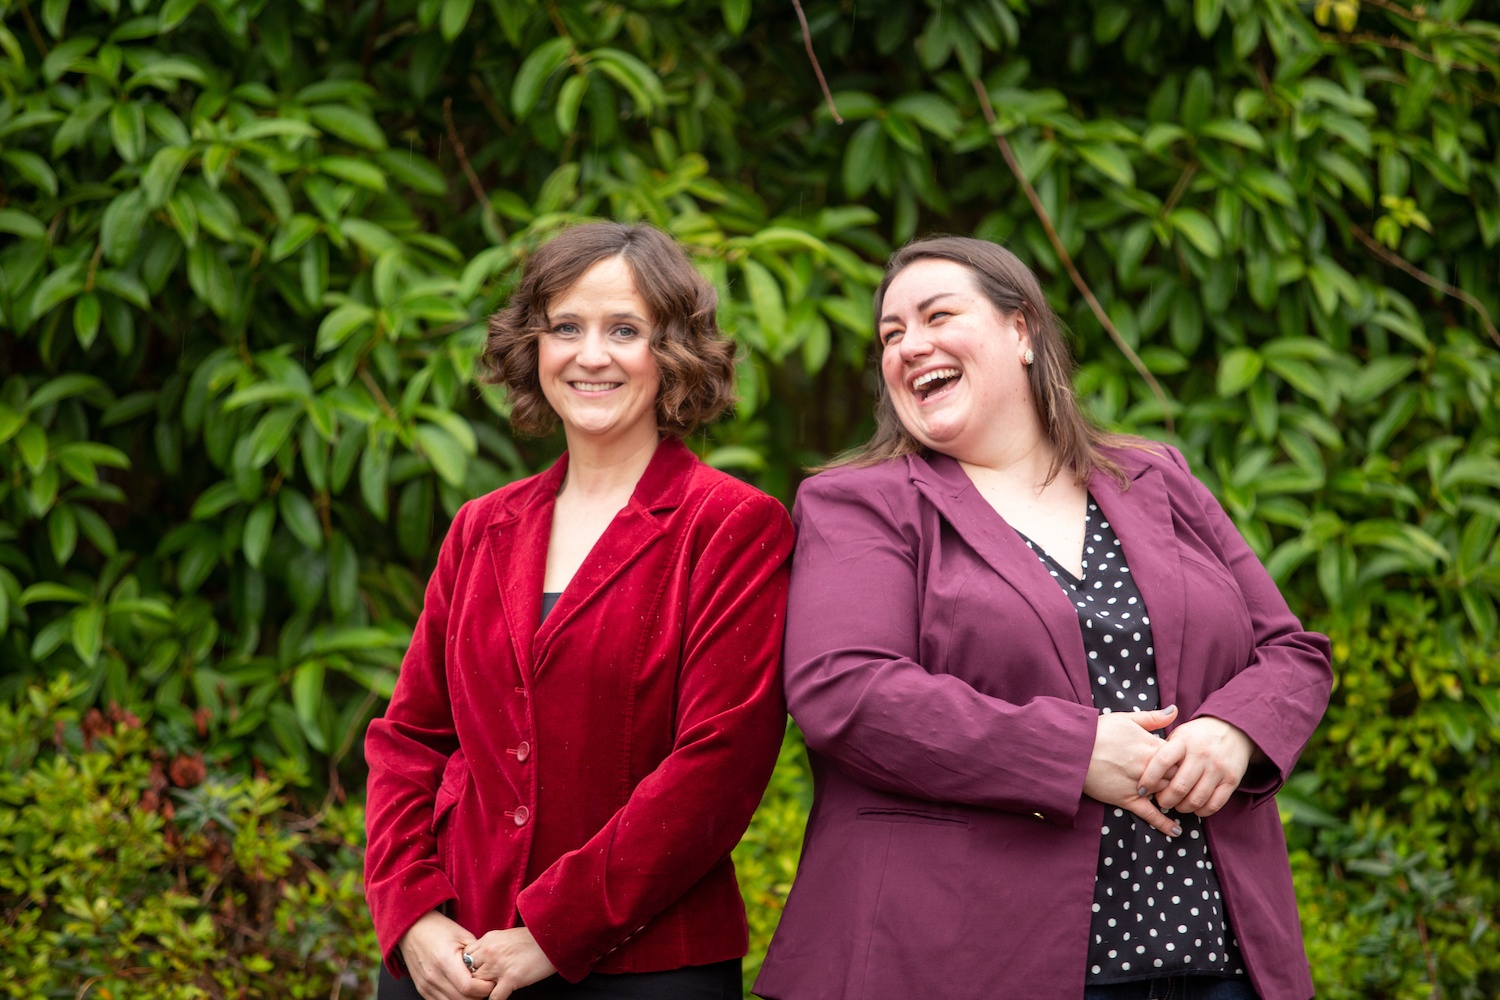 Leila Strickland (left) and Michelle Eggers (right) co-founders of Biomilq July 2020